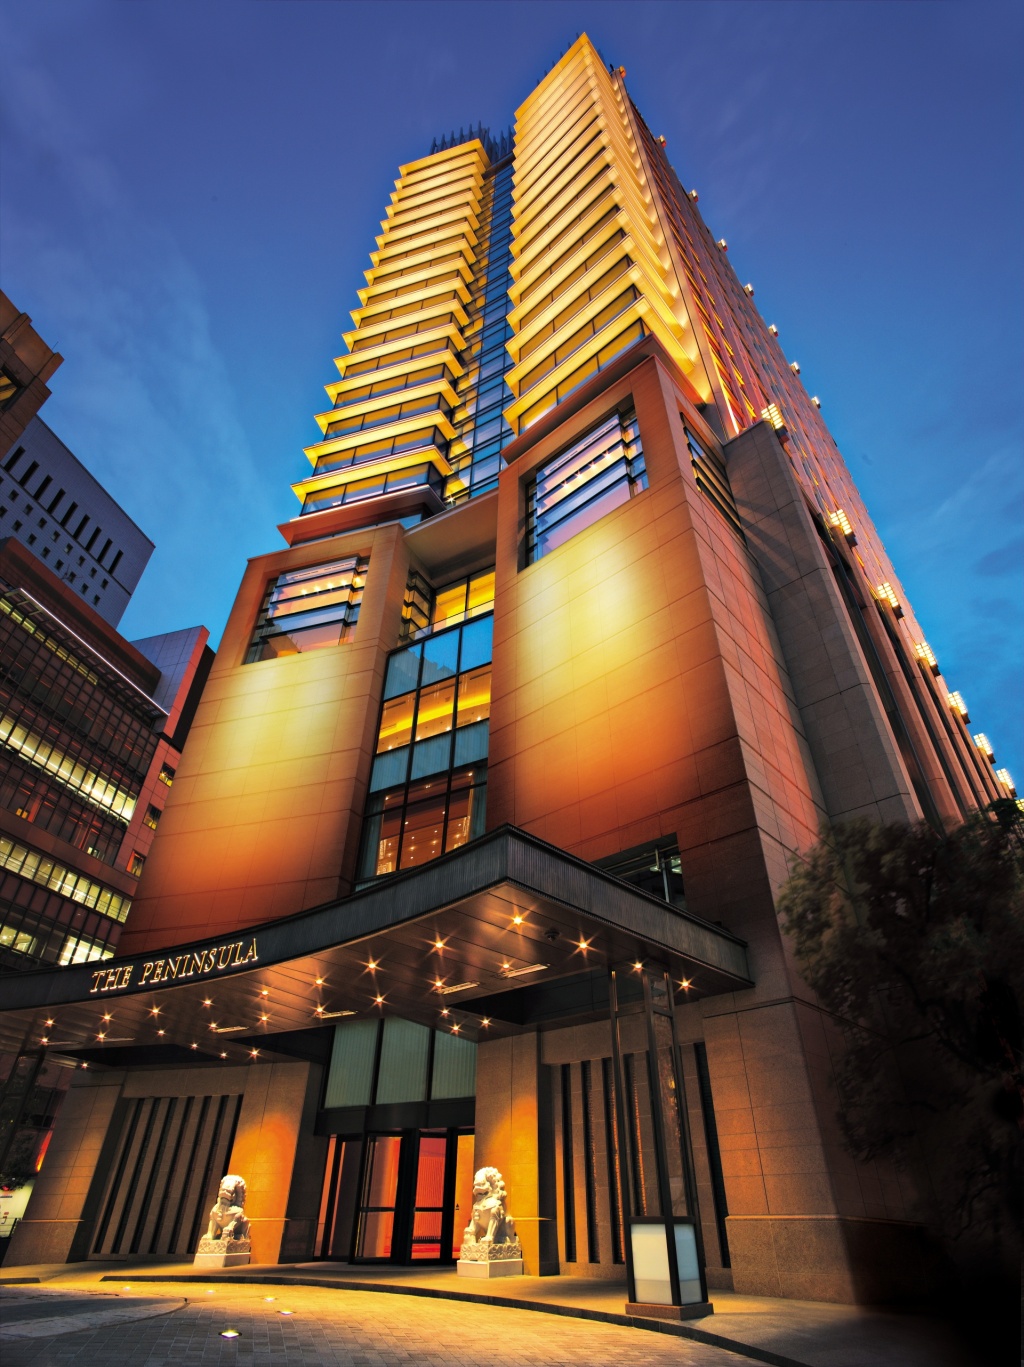 Make Caricature From Photo Online - Tokyo Hotel Peninsula Hotels Japan ...